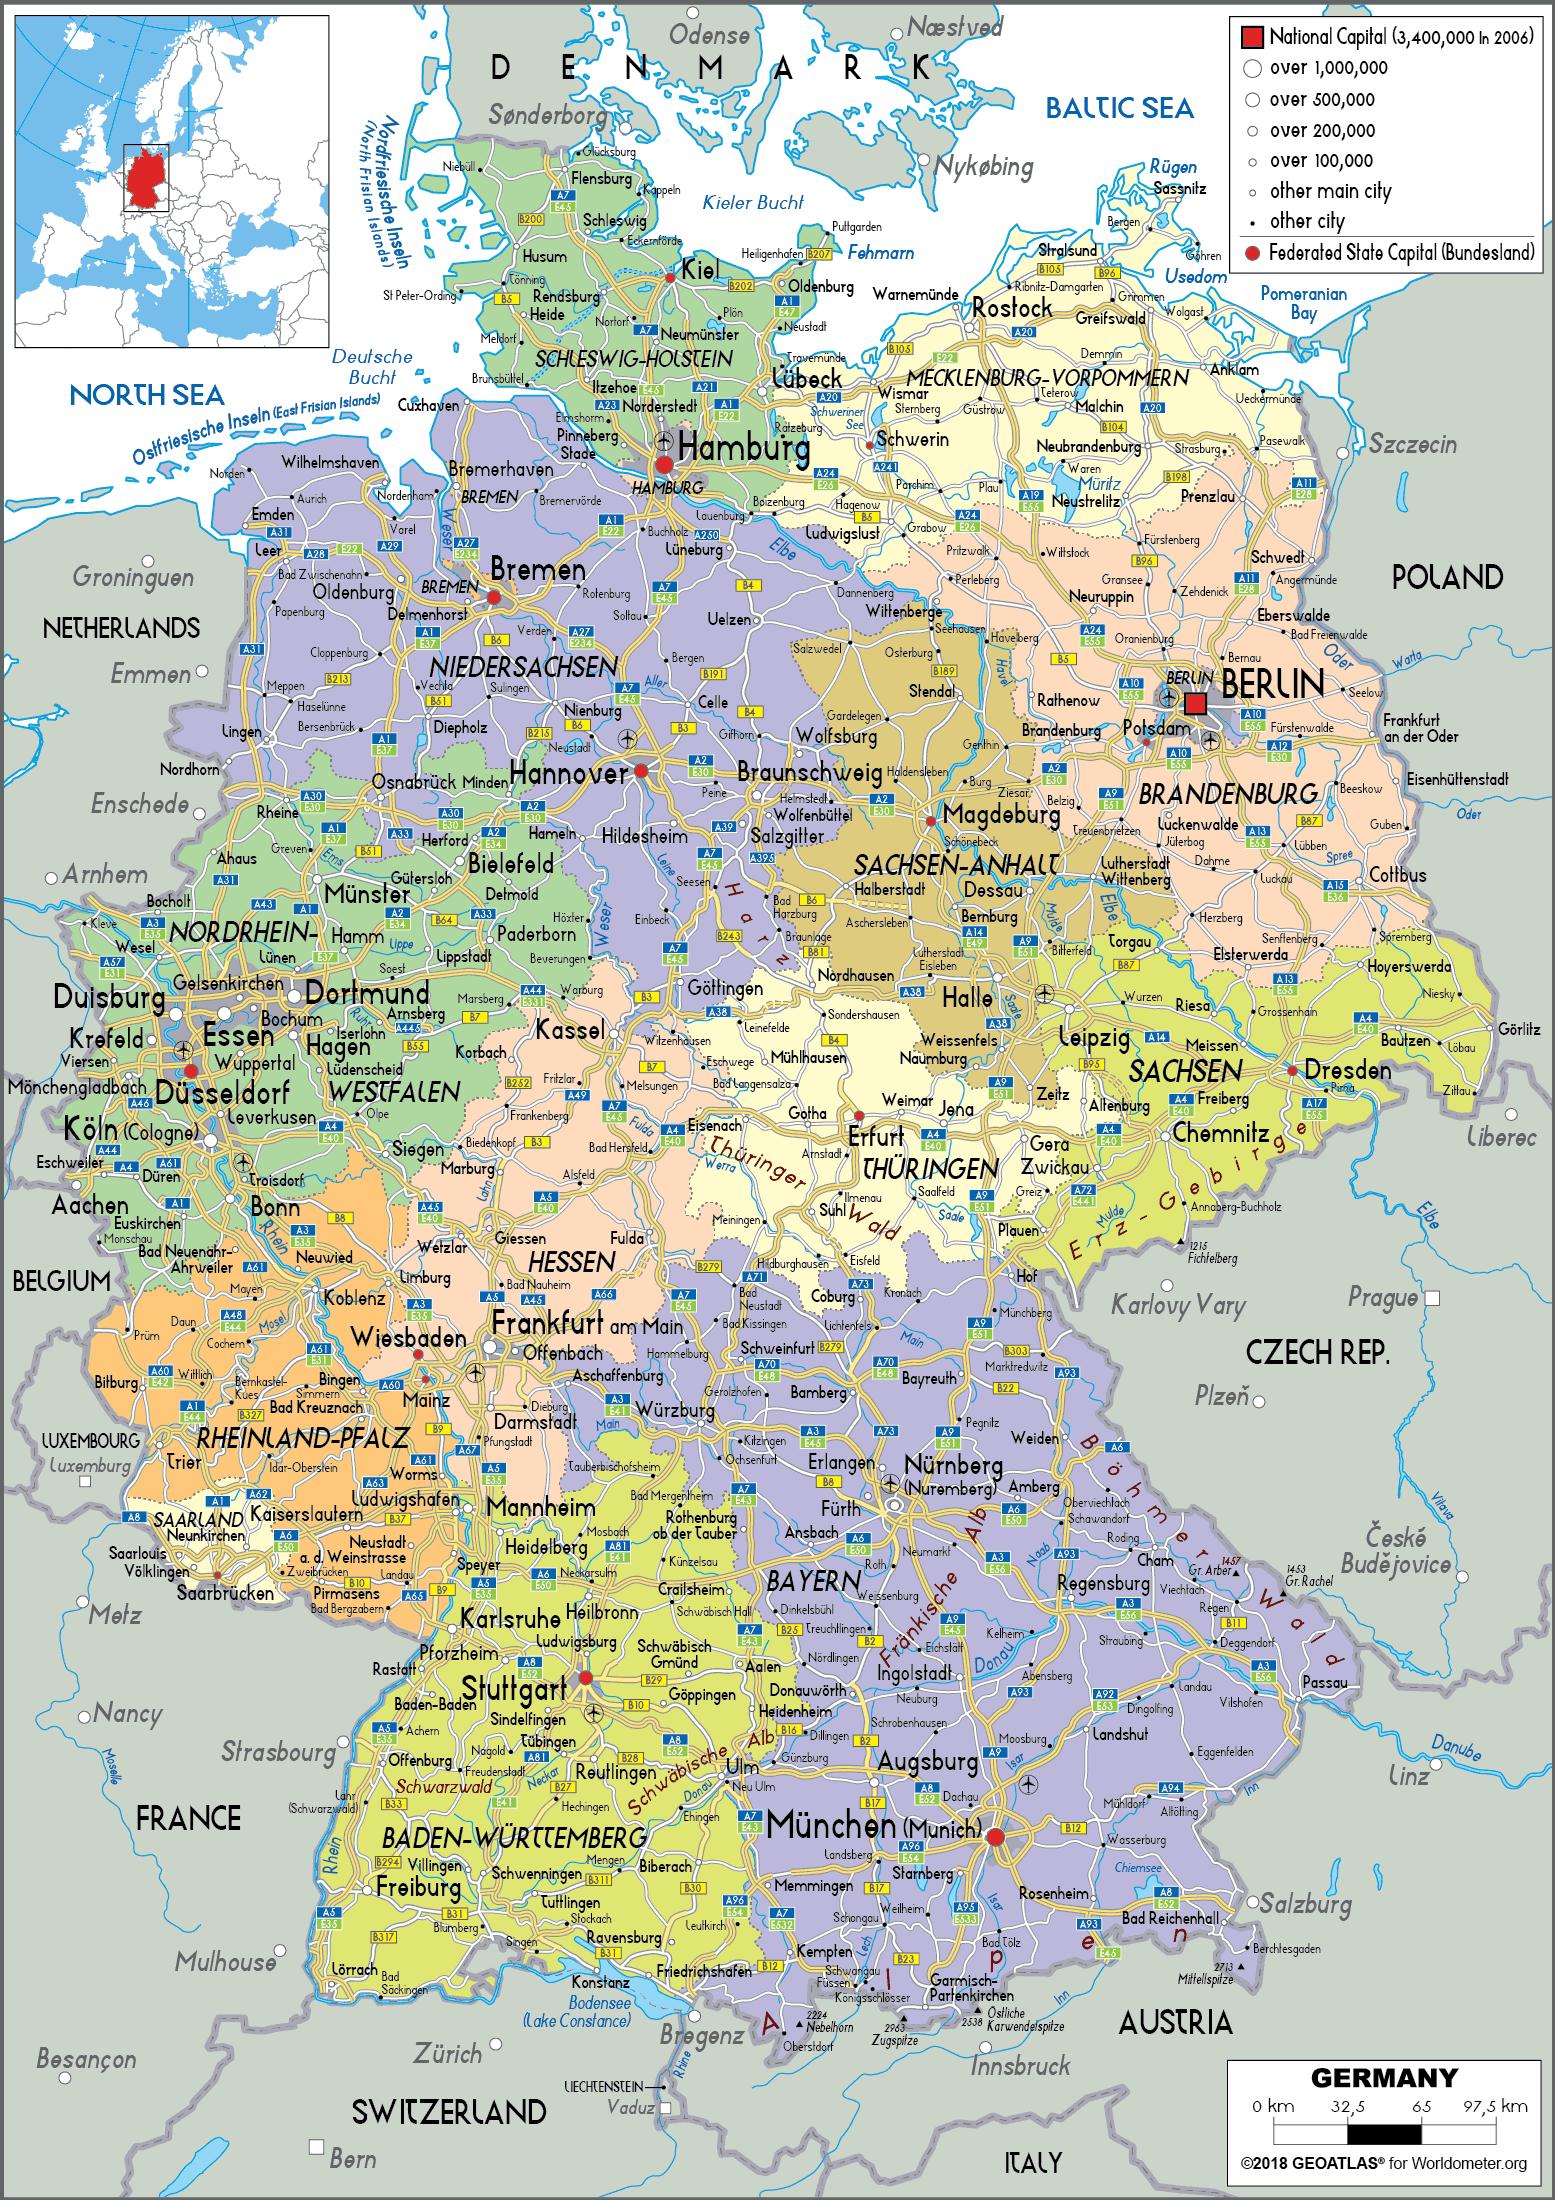 Germany political map - Map of Germany and surrounding countries